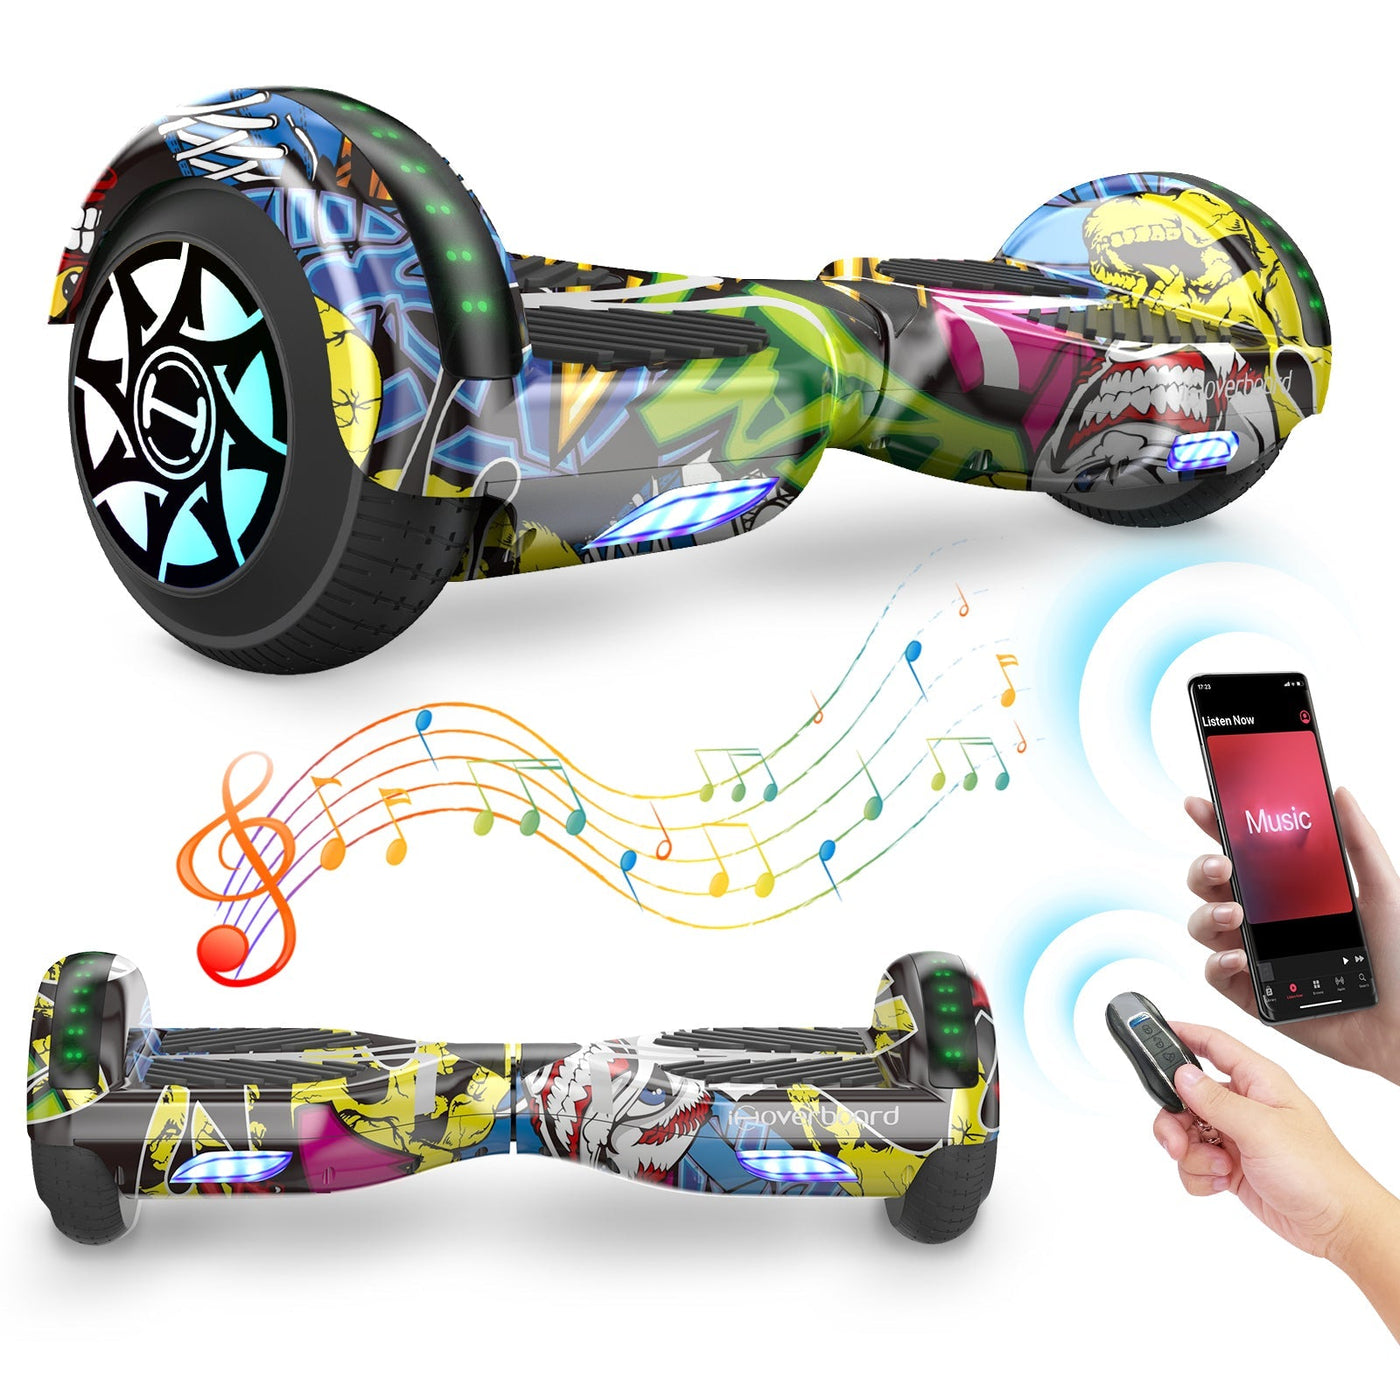 Schnelles H4 Bluetooth Hoverboard in Tarnfarbe